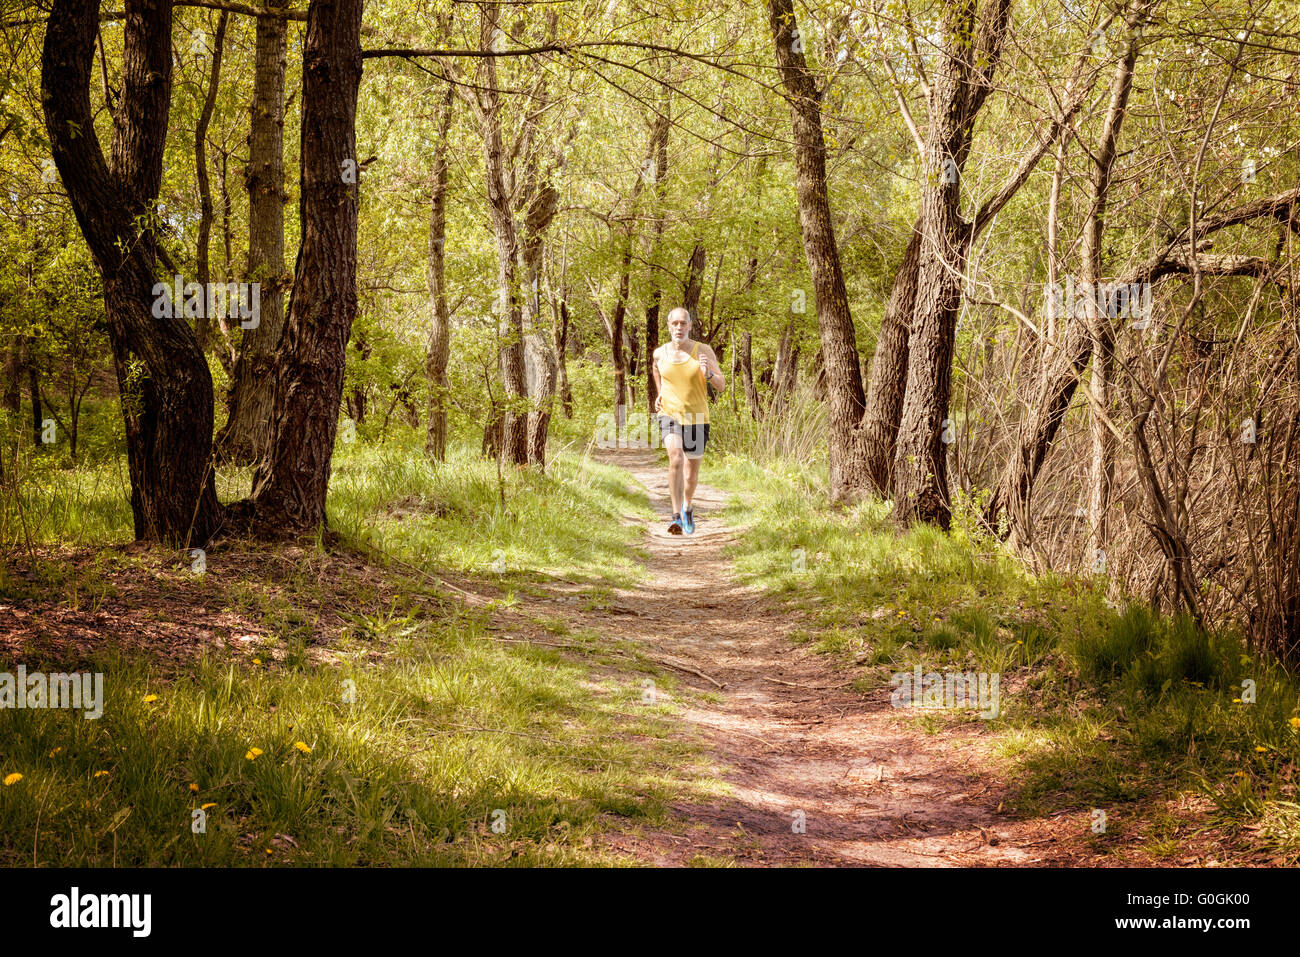 A senior man worn in black and yellow is running in the forest, during a warm spring day evening Stock Photo